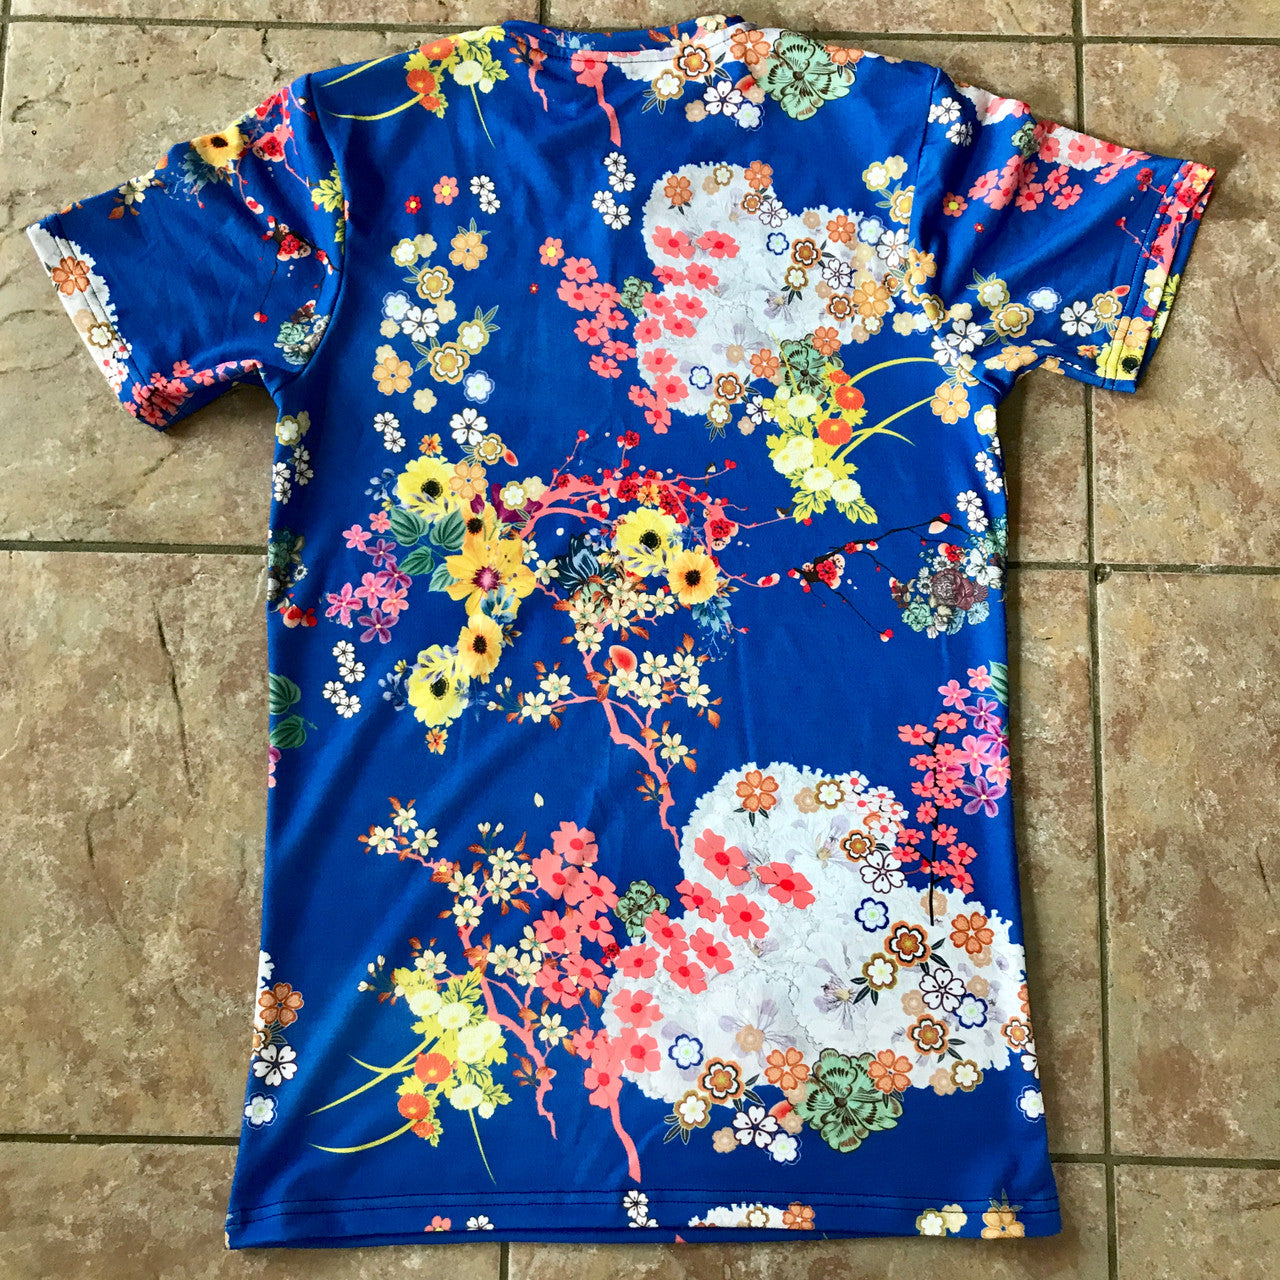 Romeo KiSS V Neck Cut & Sew T-Shirt - Japanese Flowers Floral - Leonardo DiCaprio Juliet Movie - 90s Gift for Her or Him